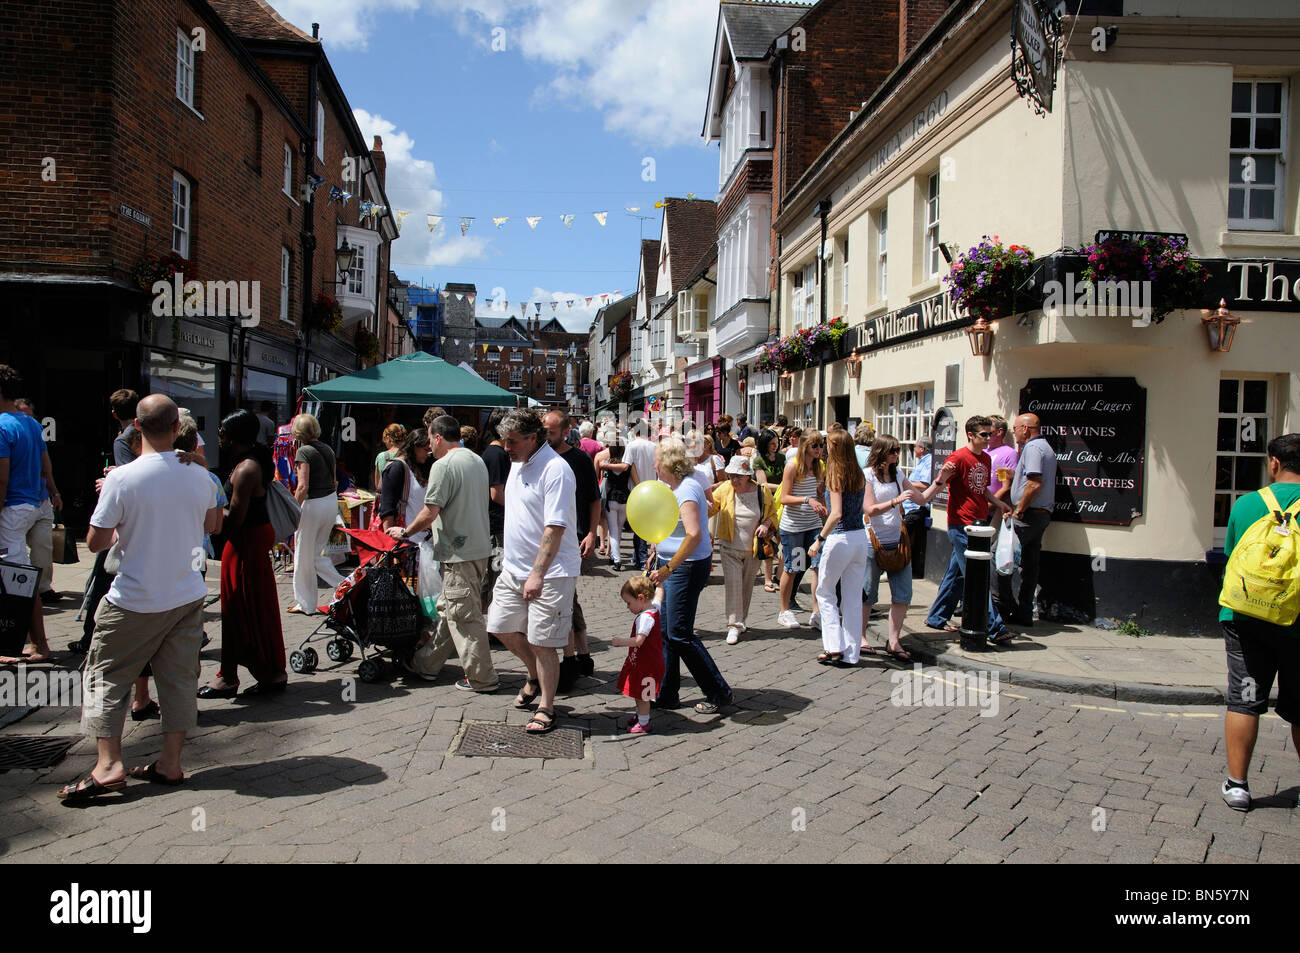 Winchester Hat Fair an annual event Winchester Hampshire UK crowded street with market stalls and a public house Stock Photo